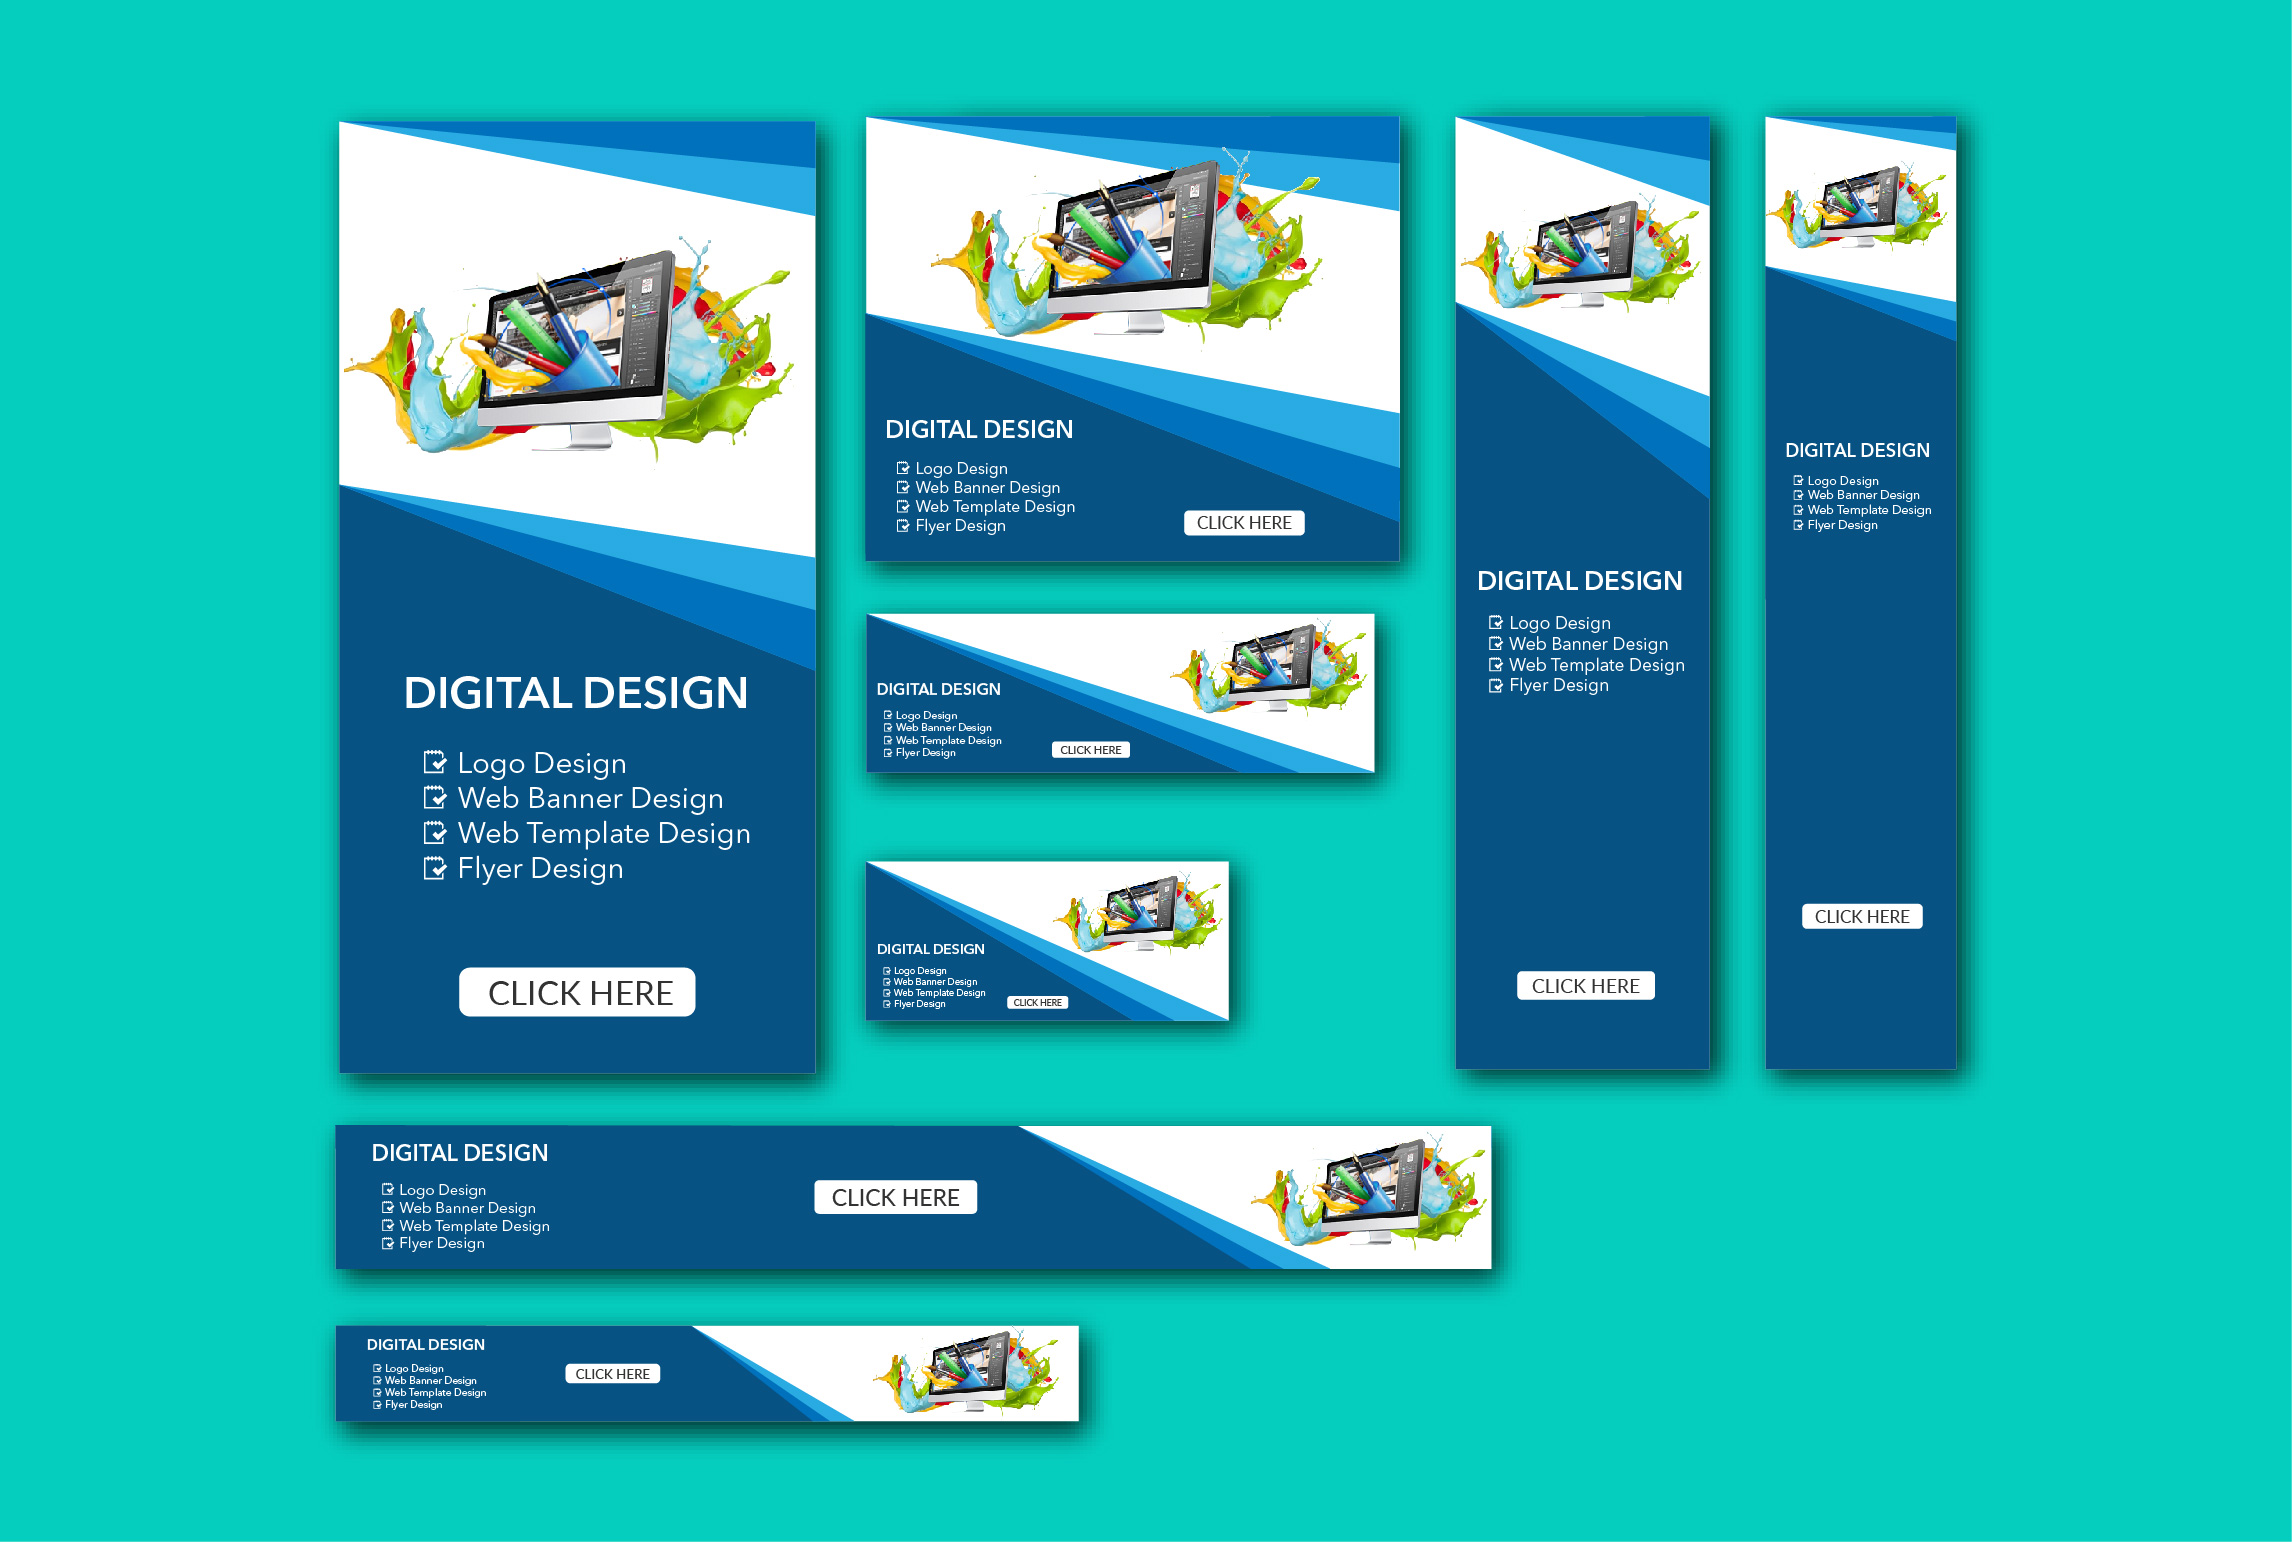 I will design HTML5 animated banner ads that get more ...